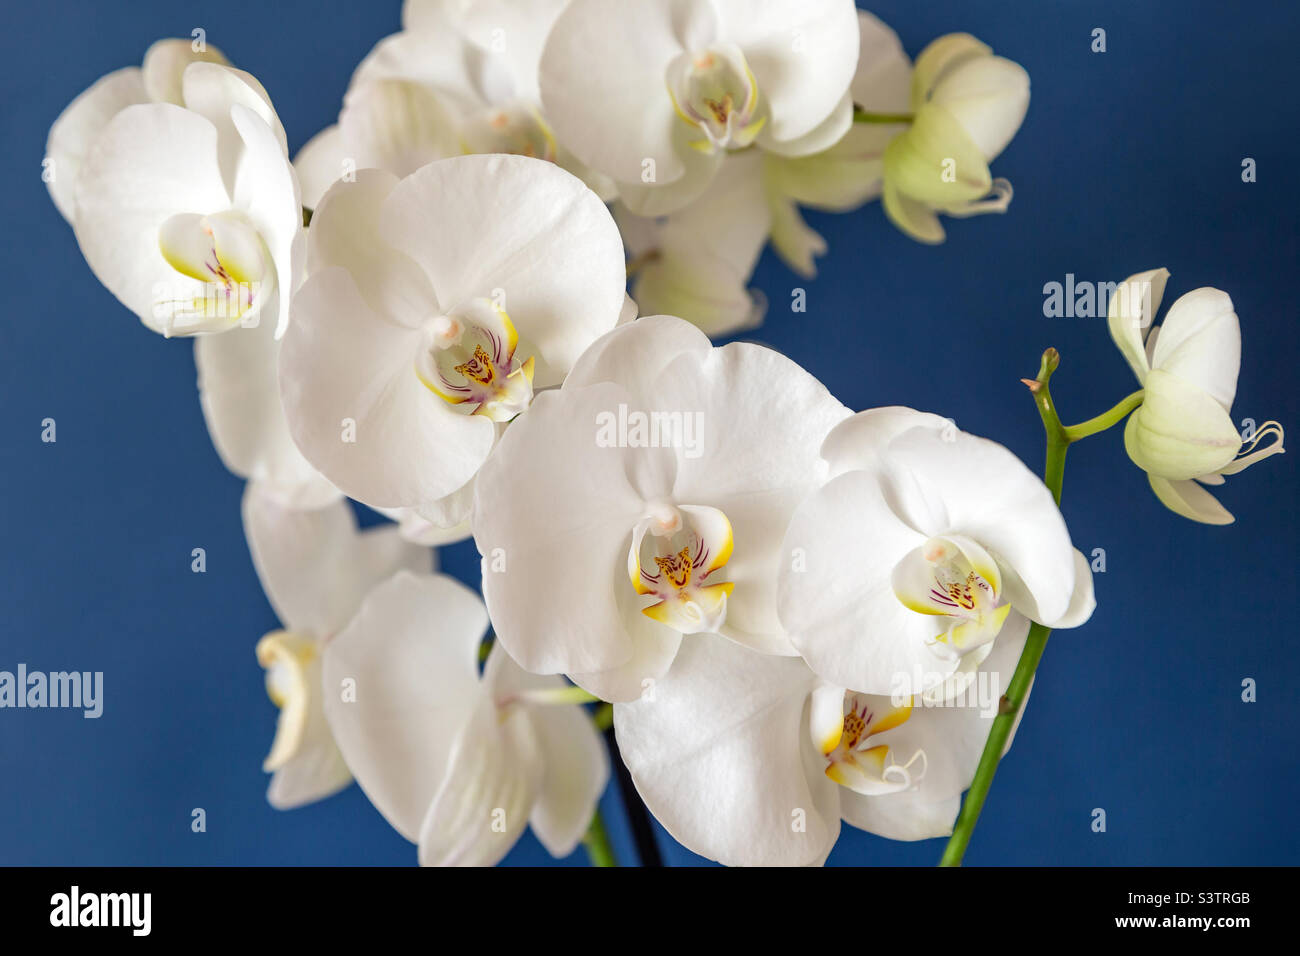 Big white orchid flowers on blue background, closeup Stock Photo